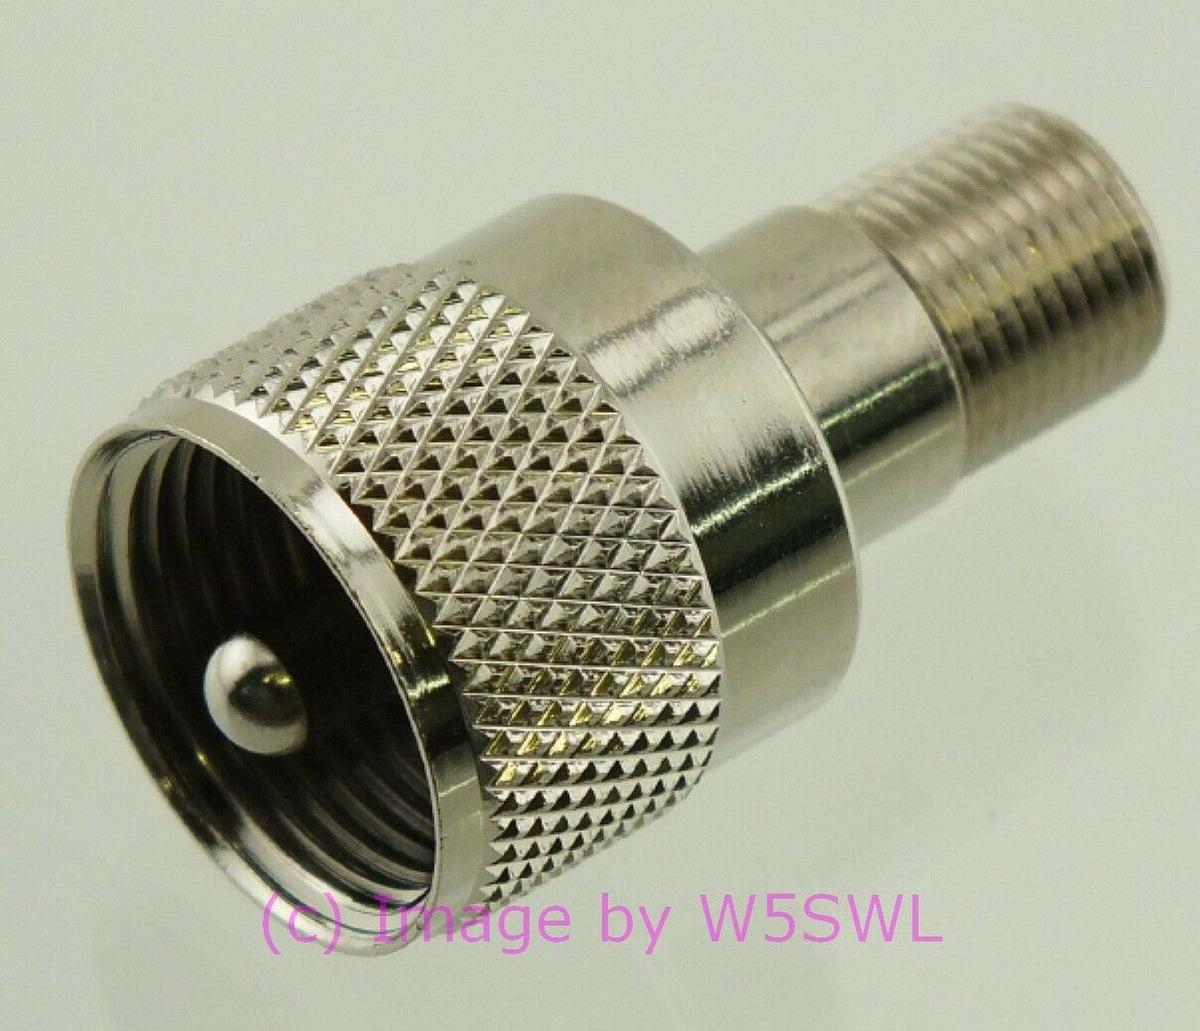 W5SWL UHF Male to Type F Female Coax Connector Adapter - Dave's Hobby Shop by W5SWL